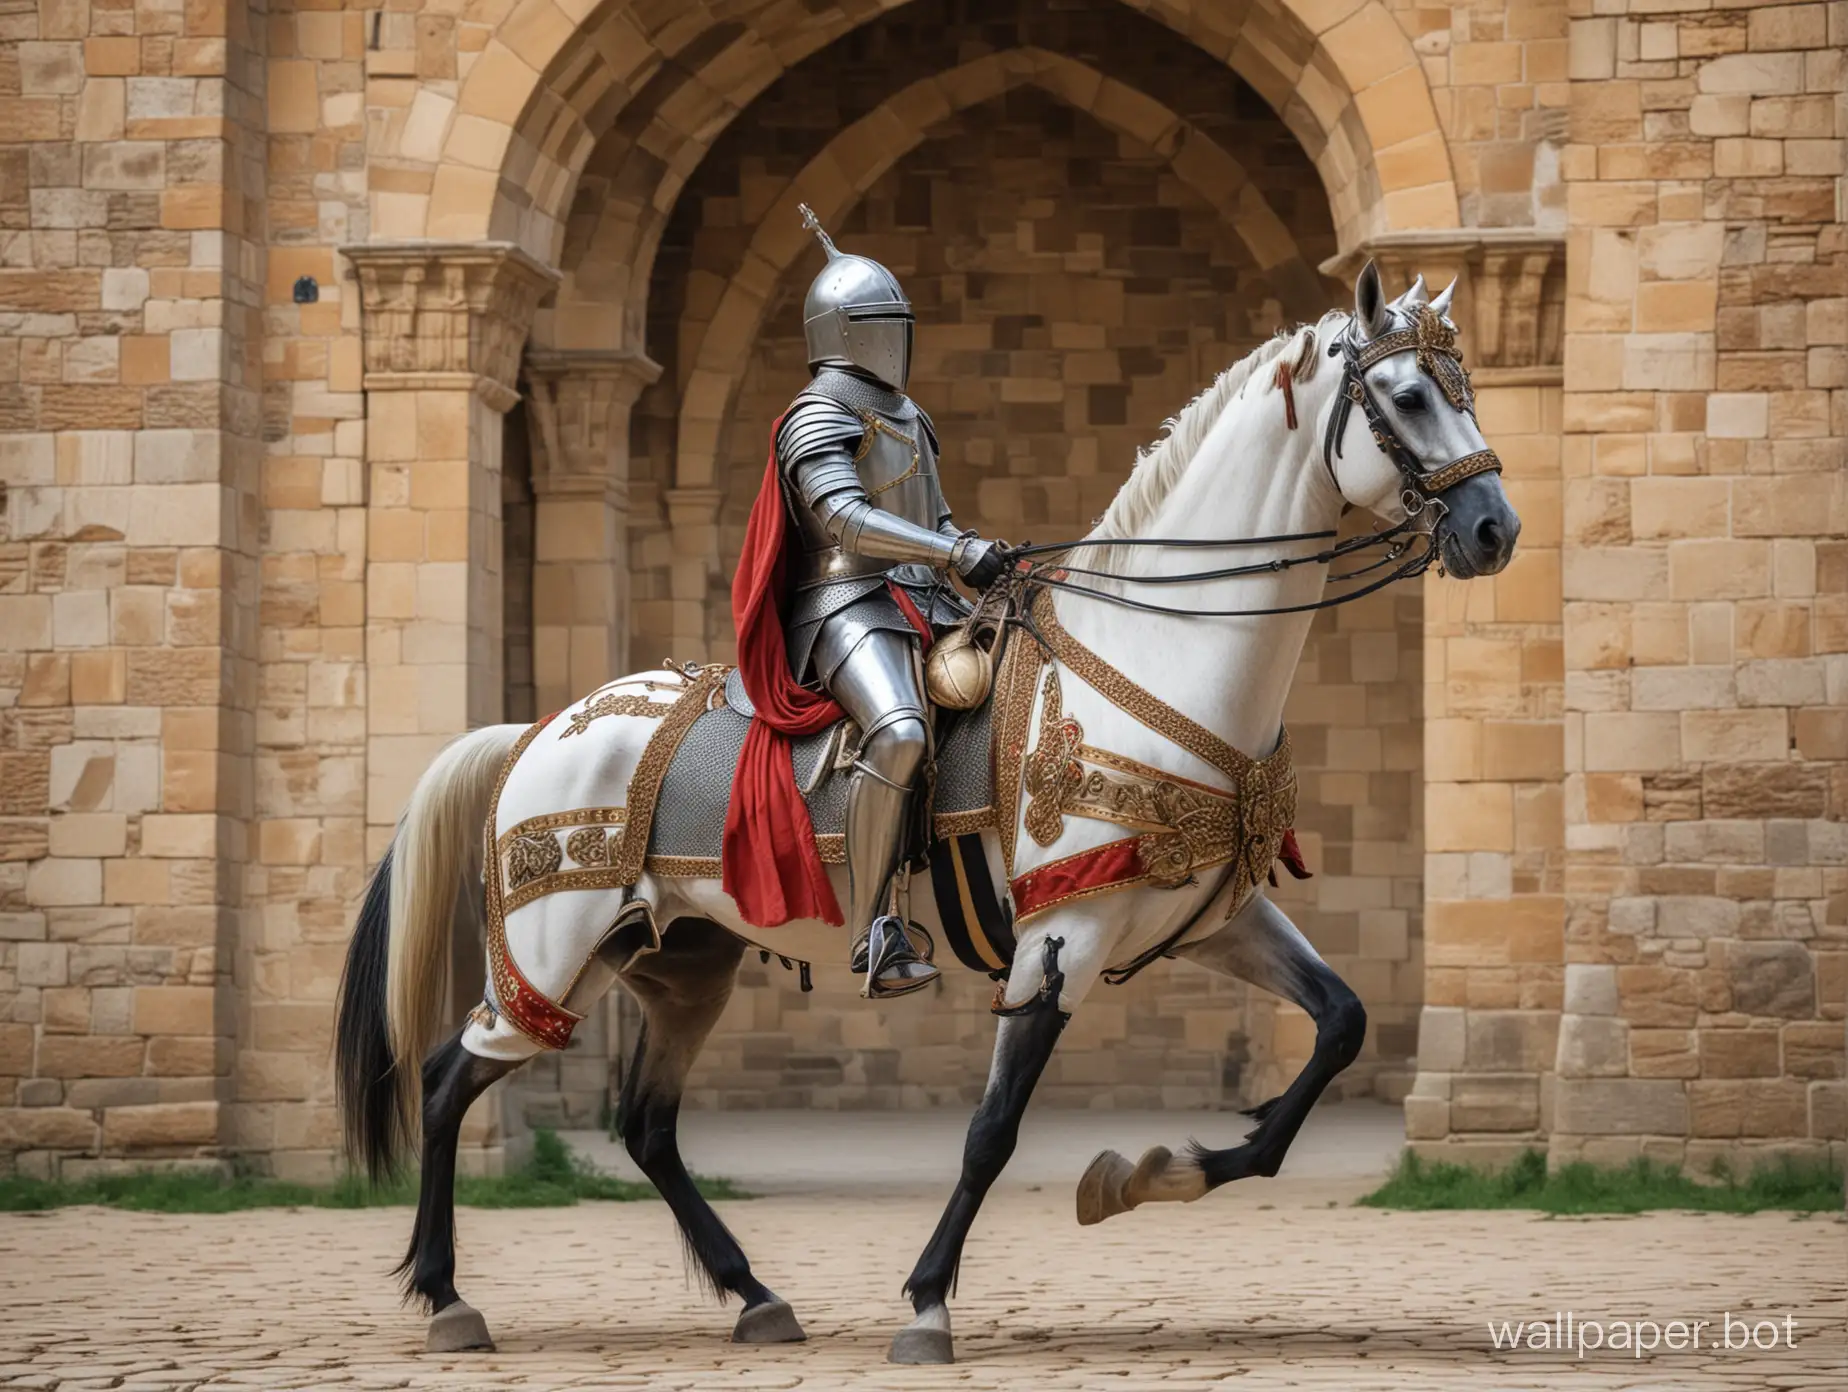 Medieval-Knight-Beetle-Riding-Arabian-Horse-in-Castle-Setting